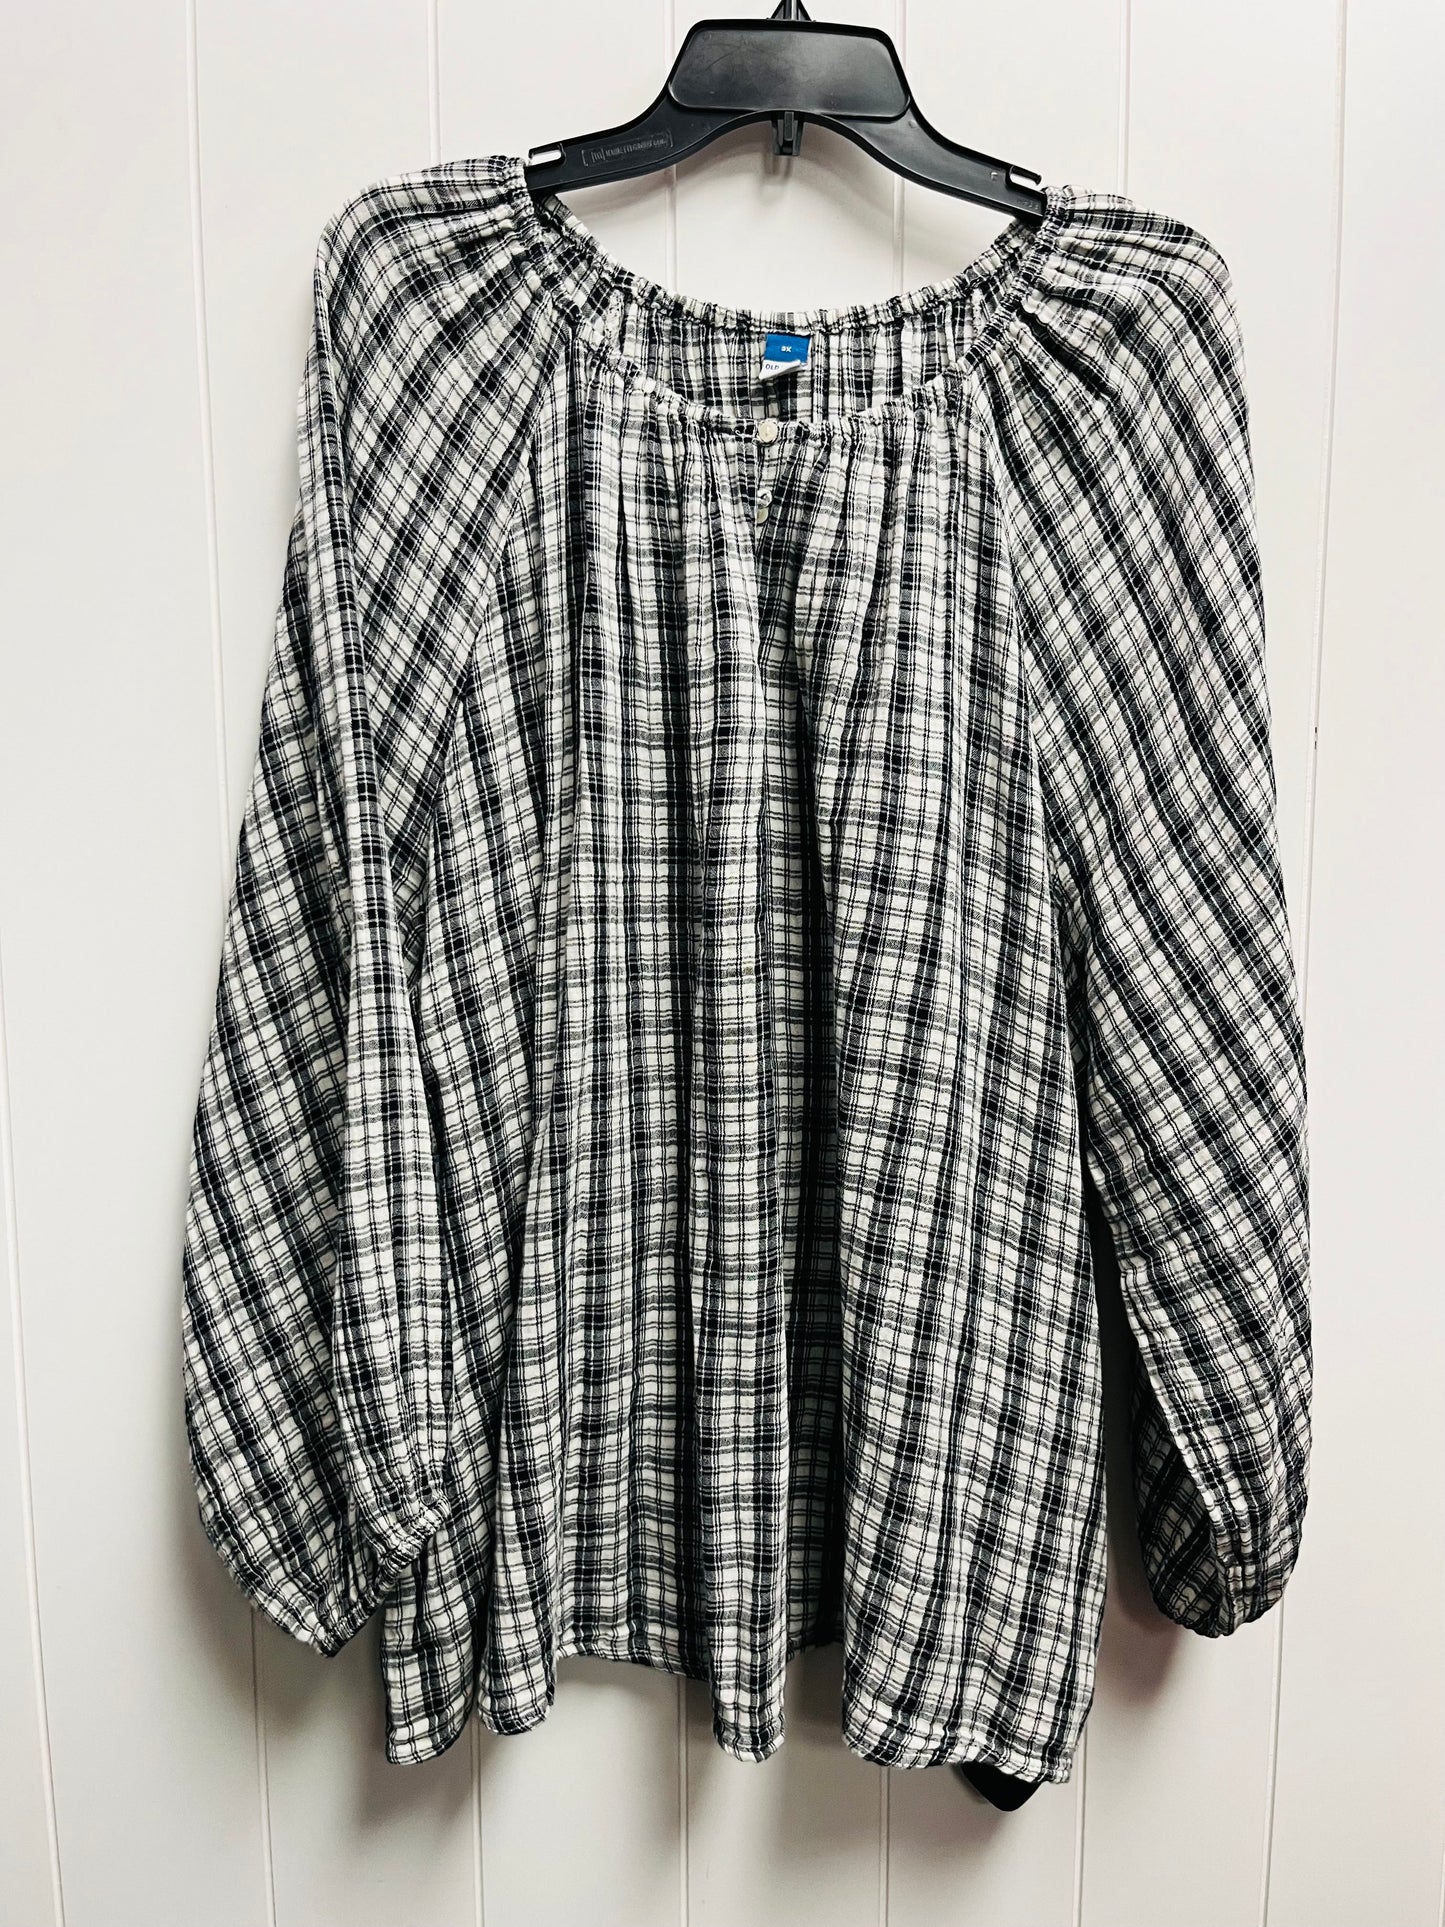 Black & White Top Long Sleeve Old Navy, Size 3x